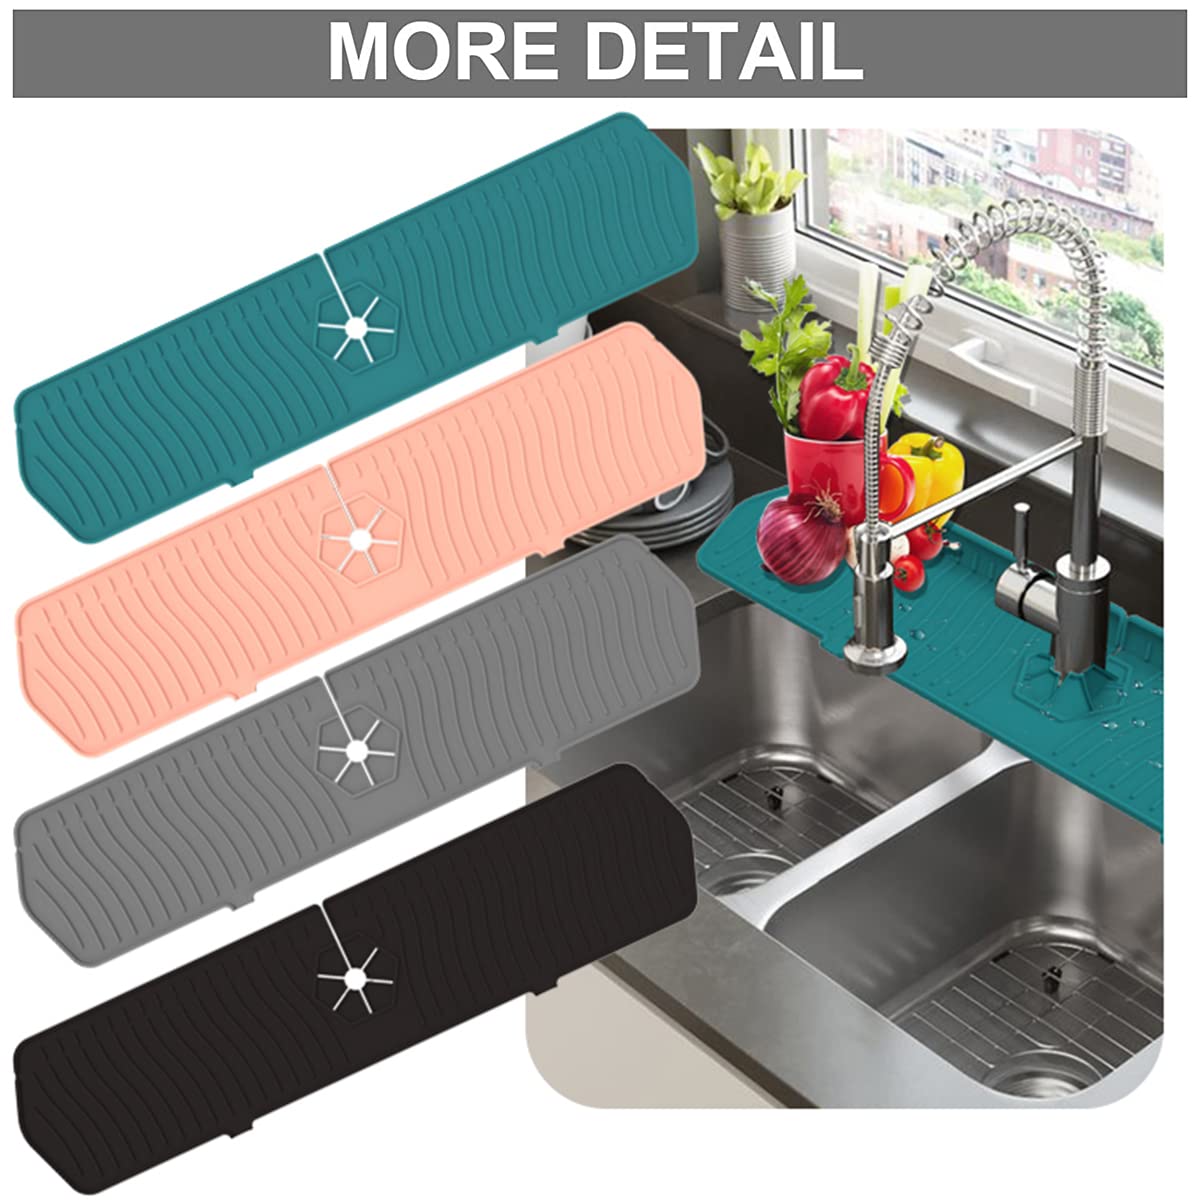 Aynuma Kitchen Faucet Sink Splash Guard, 24" x 5.6'' Upgrade Silicone Faucet Water Catcher Mat, Sink Draining Pad Behind Faucet, Rubber Drying Mat for Countertop, Bathroom, Farmhouse, RV (Black)